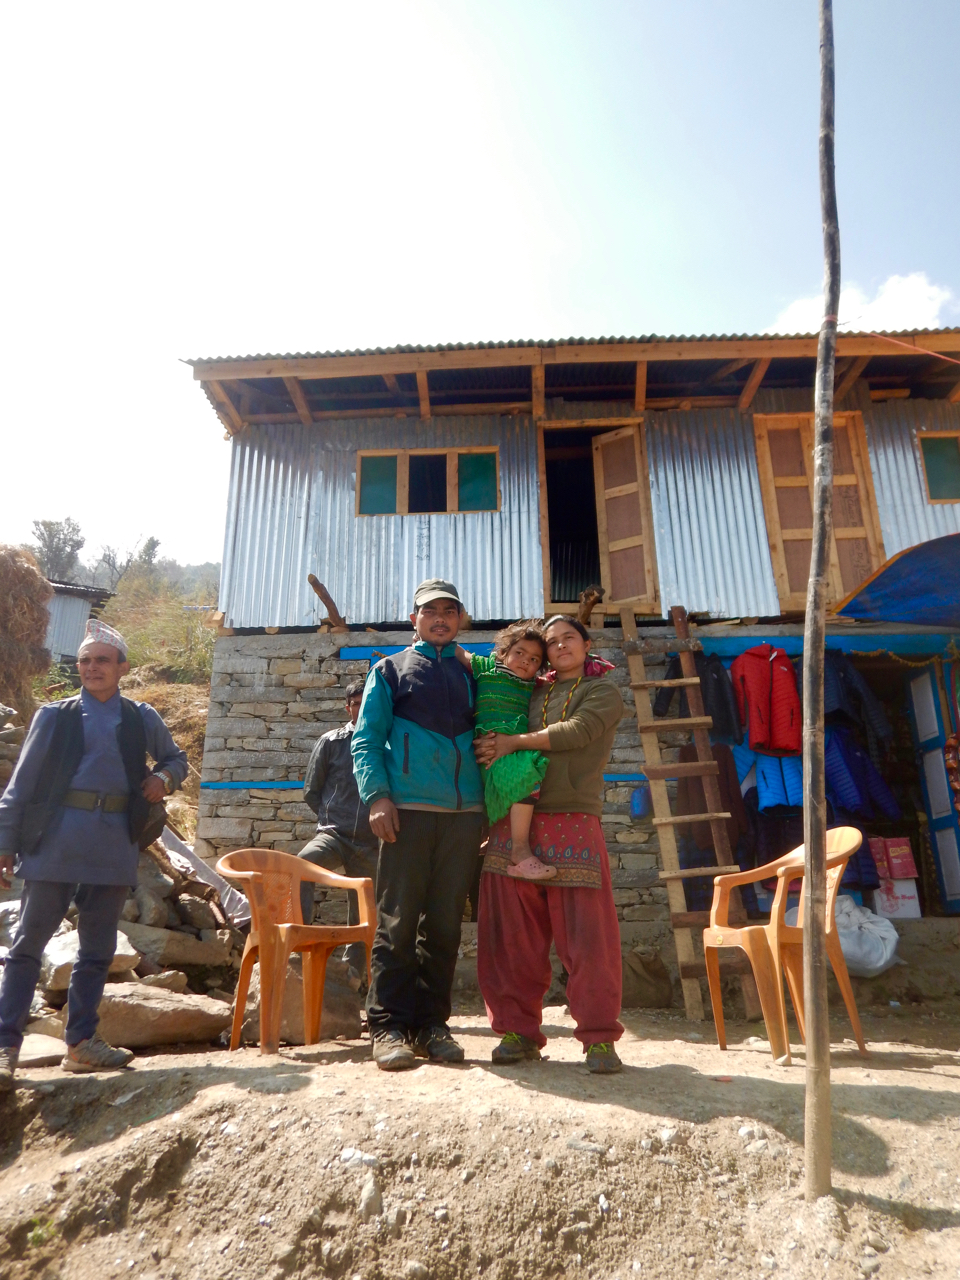 Family in front of house with 2 shops.